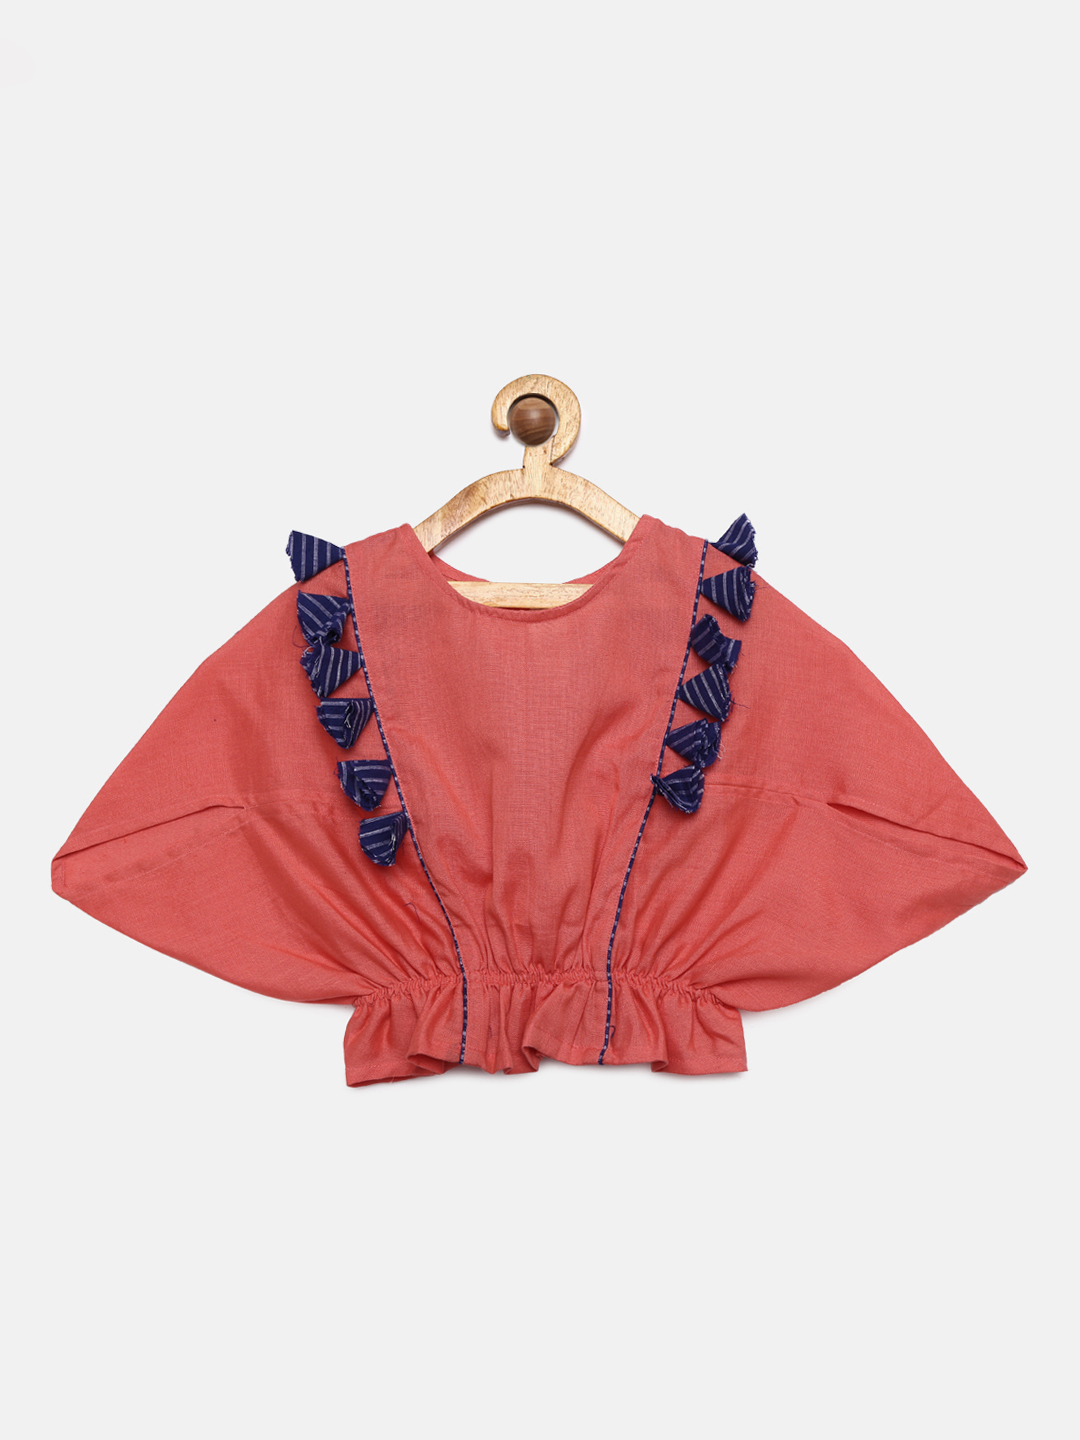 3 1 Baloon Tops with Triangular Sleeves and Stripped Trouser- Coral and Blue